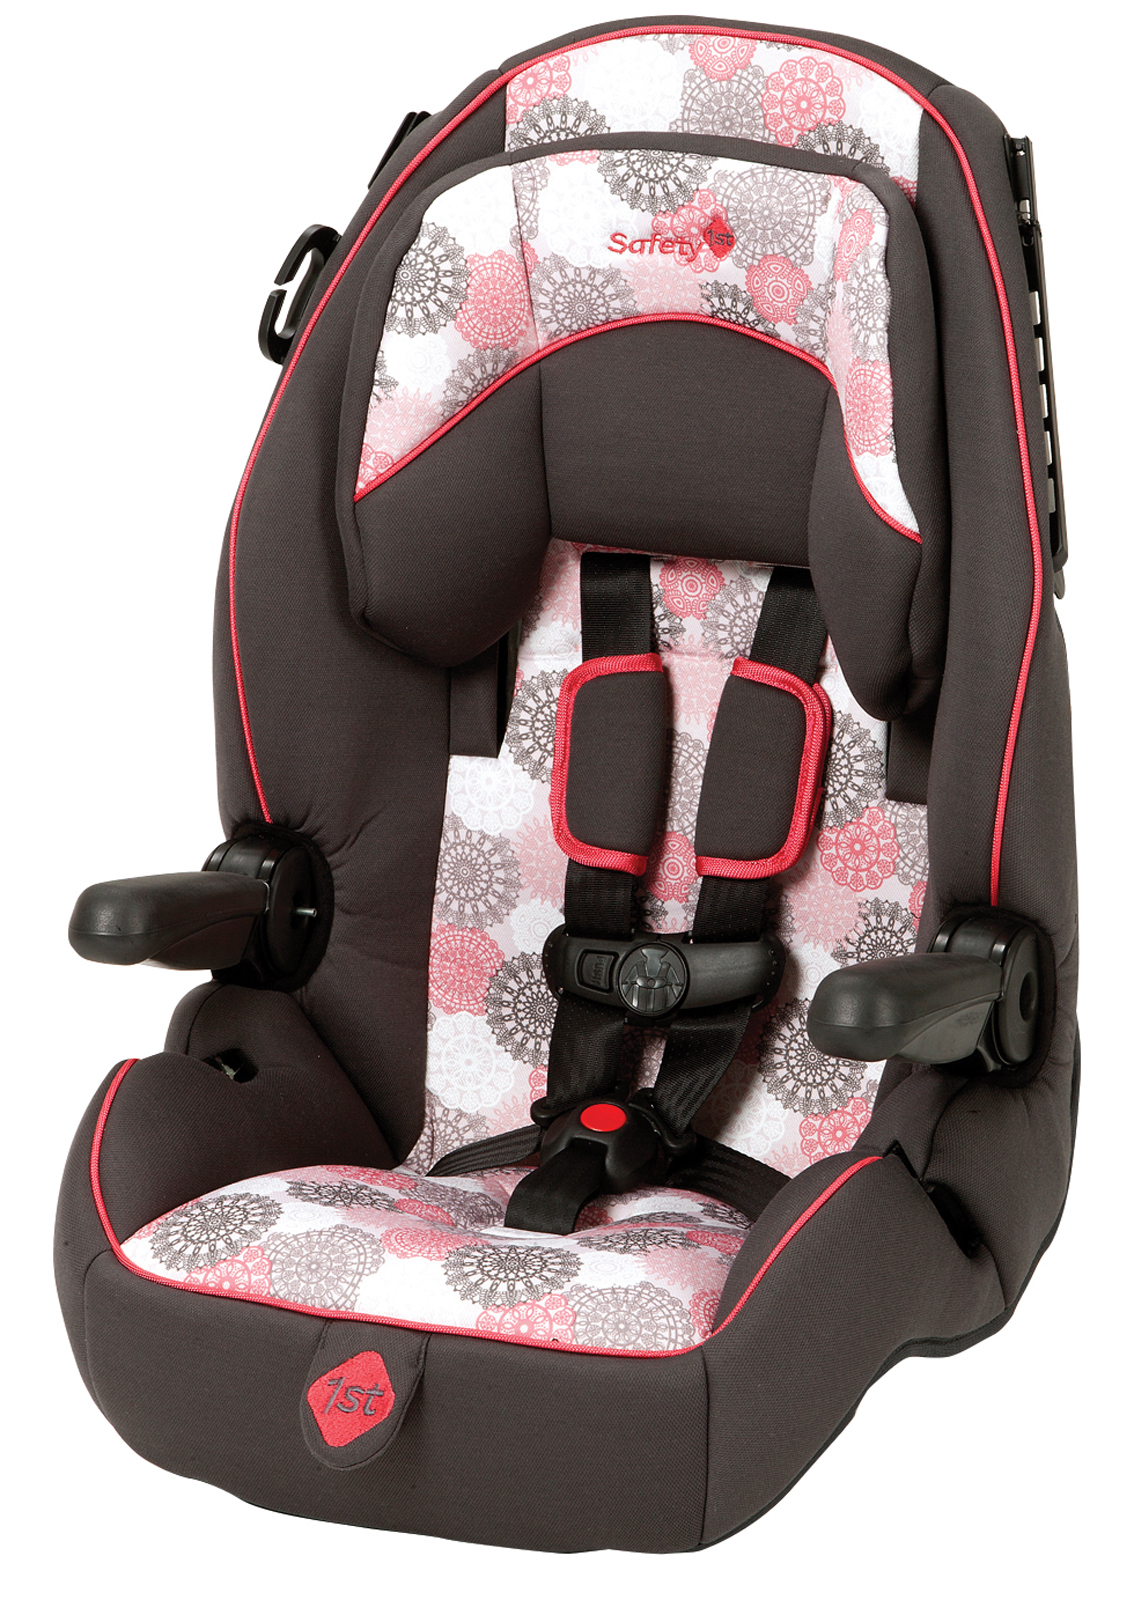 Safety 1st Summit Booster Car Seat - Chateau